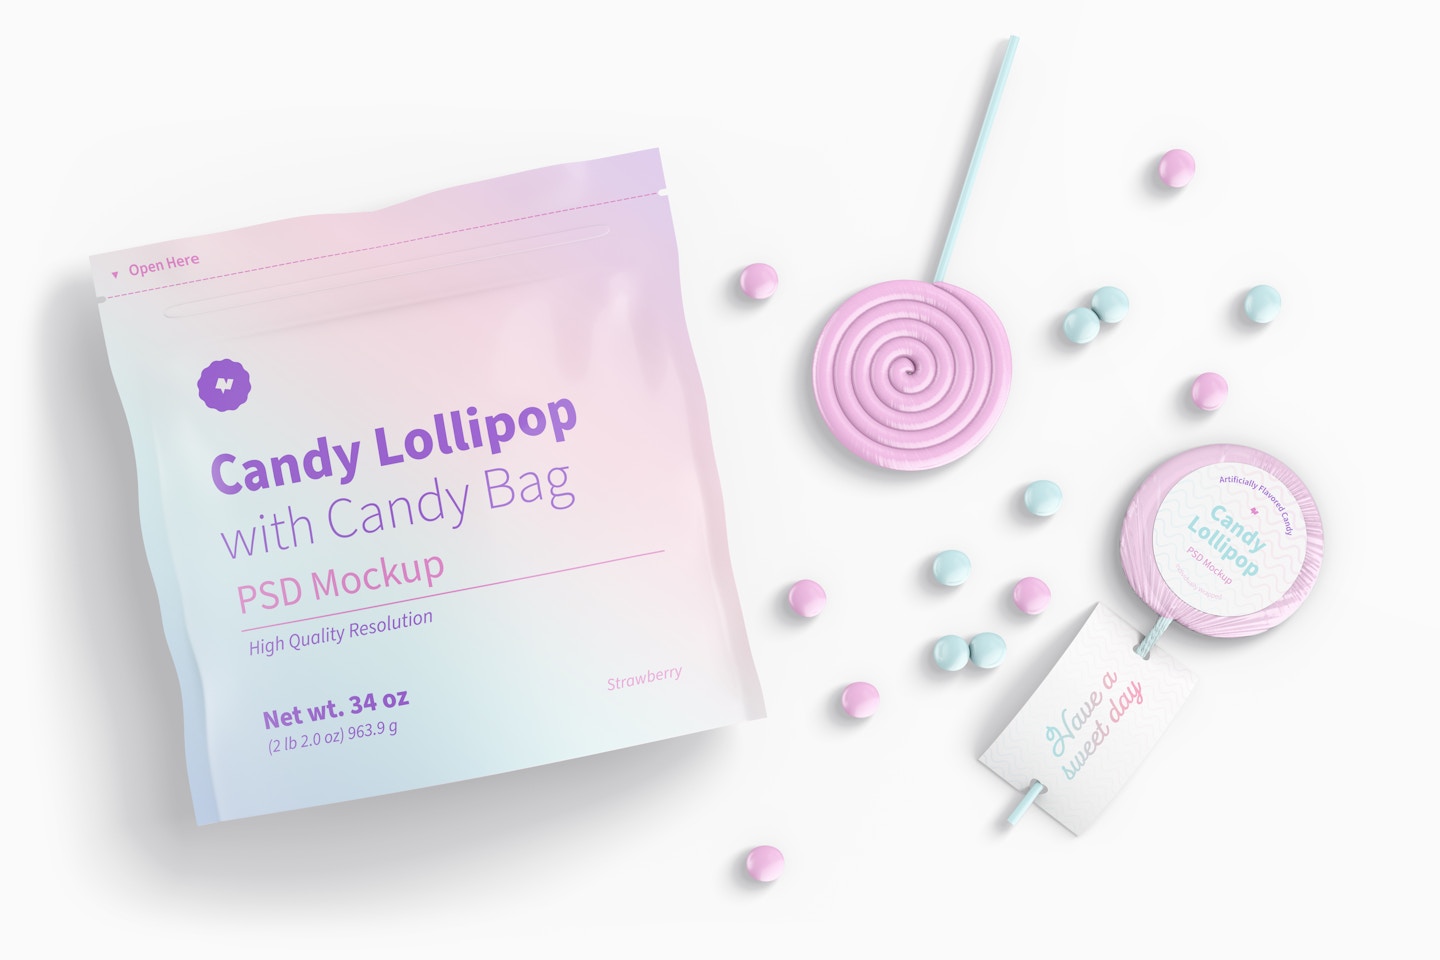 Candy Lollipop with Candy Bag Mockup